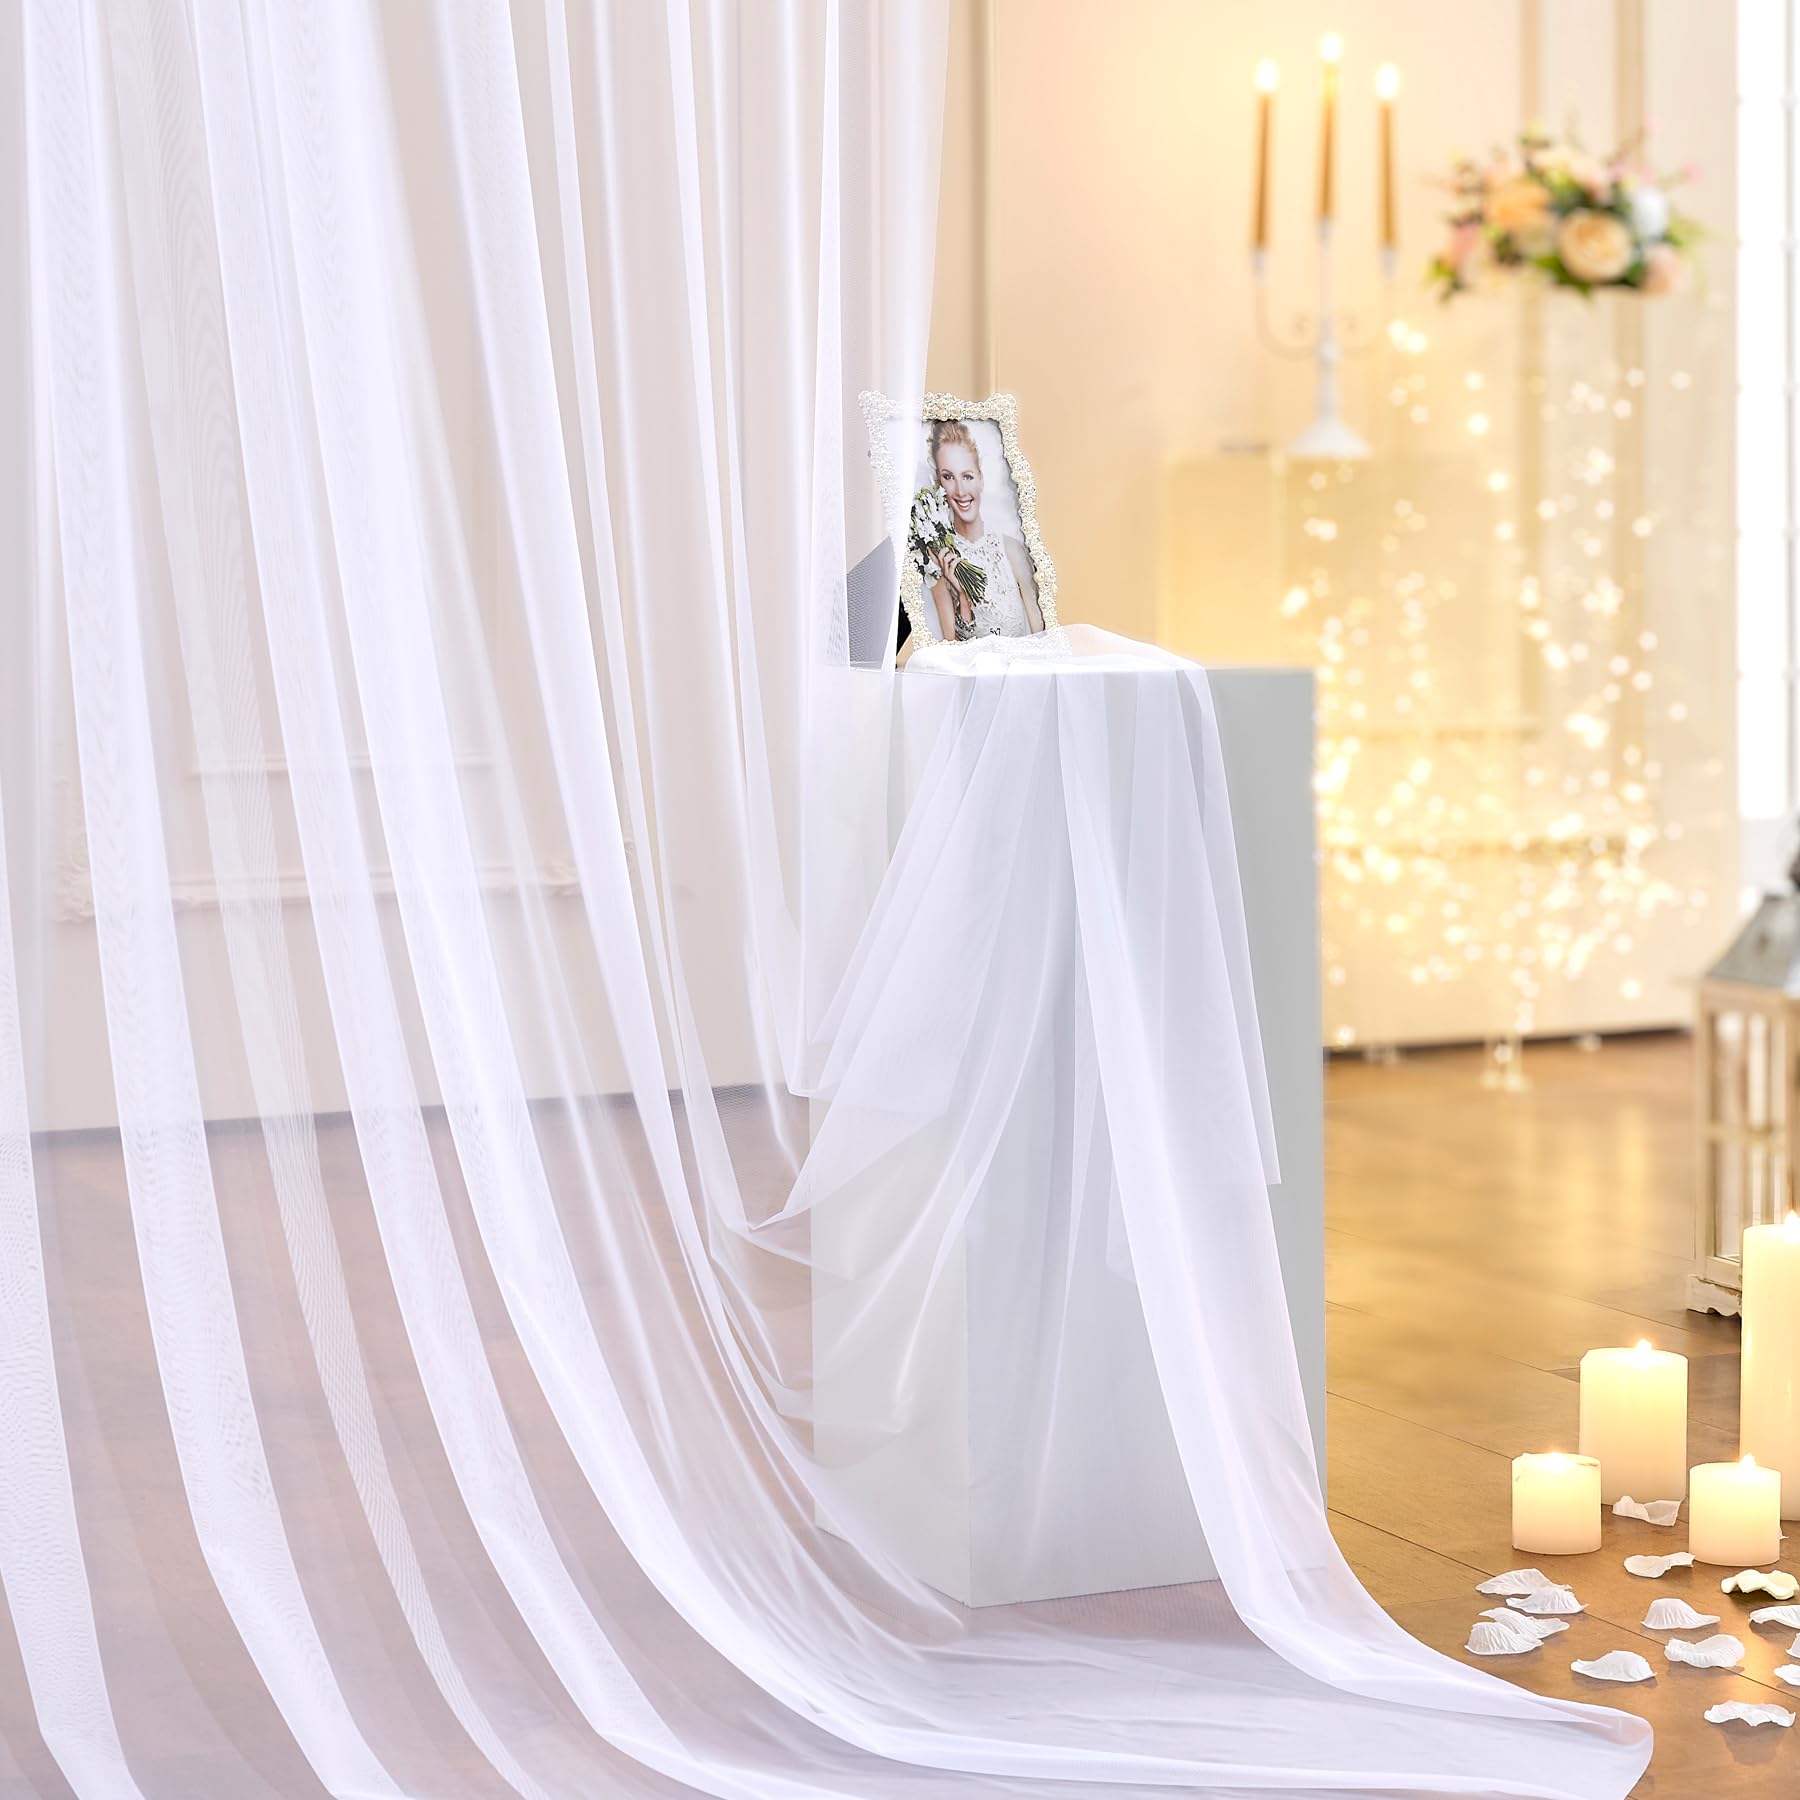 White Sheer Tulle Backdrop Curtains with Lights String for Party Wedding Wrinkle Free Curtain Backdrops Drapes for Baby Shower Birthday Party Photo Back Drop Background Home Decorations 10ft x 8ft